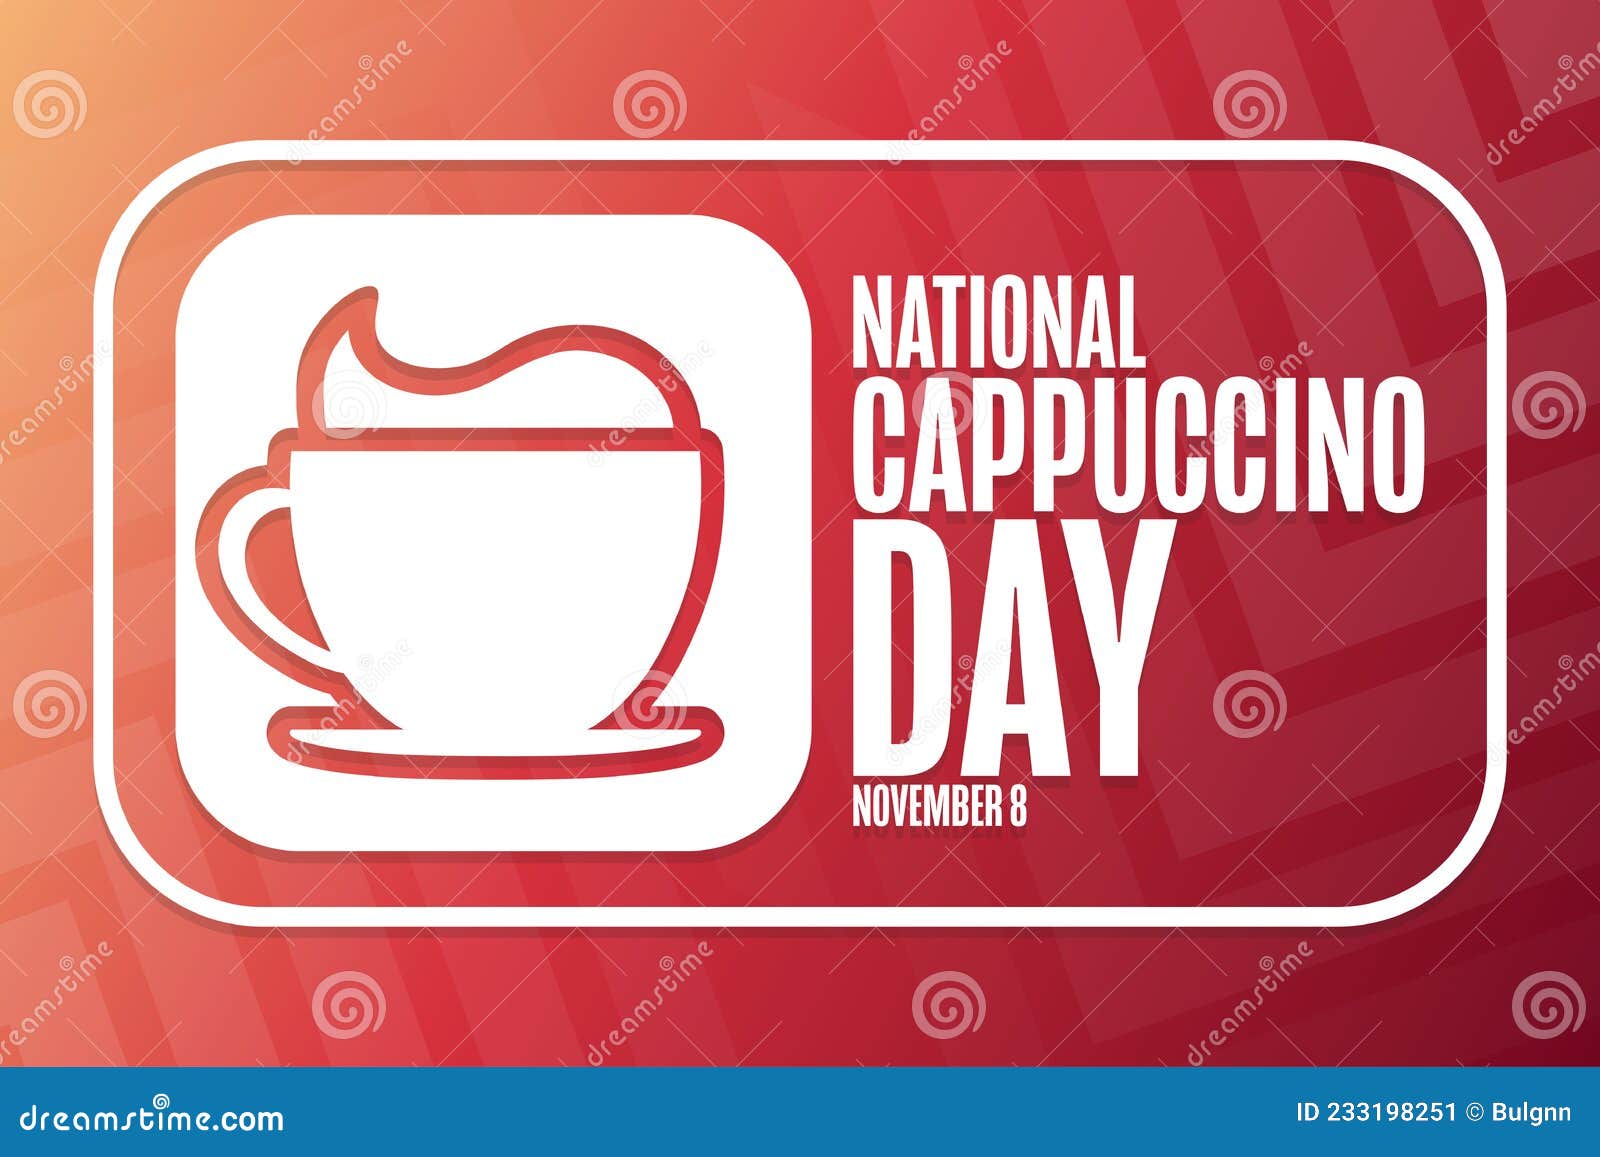 https://thumbs.dreamstime.com/z/national-cappuccino-day-november-holiday-concept-template-background-banner-card-poster-text-inscription-vector-national-233198251.jpg